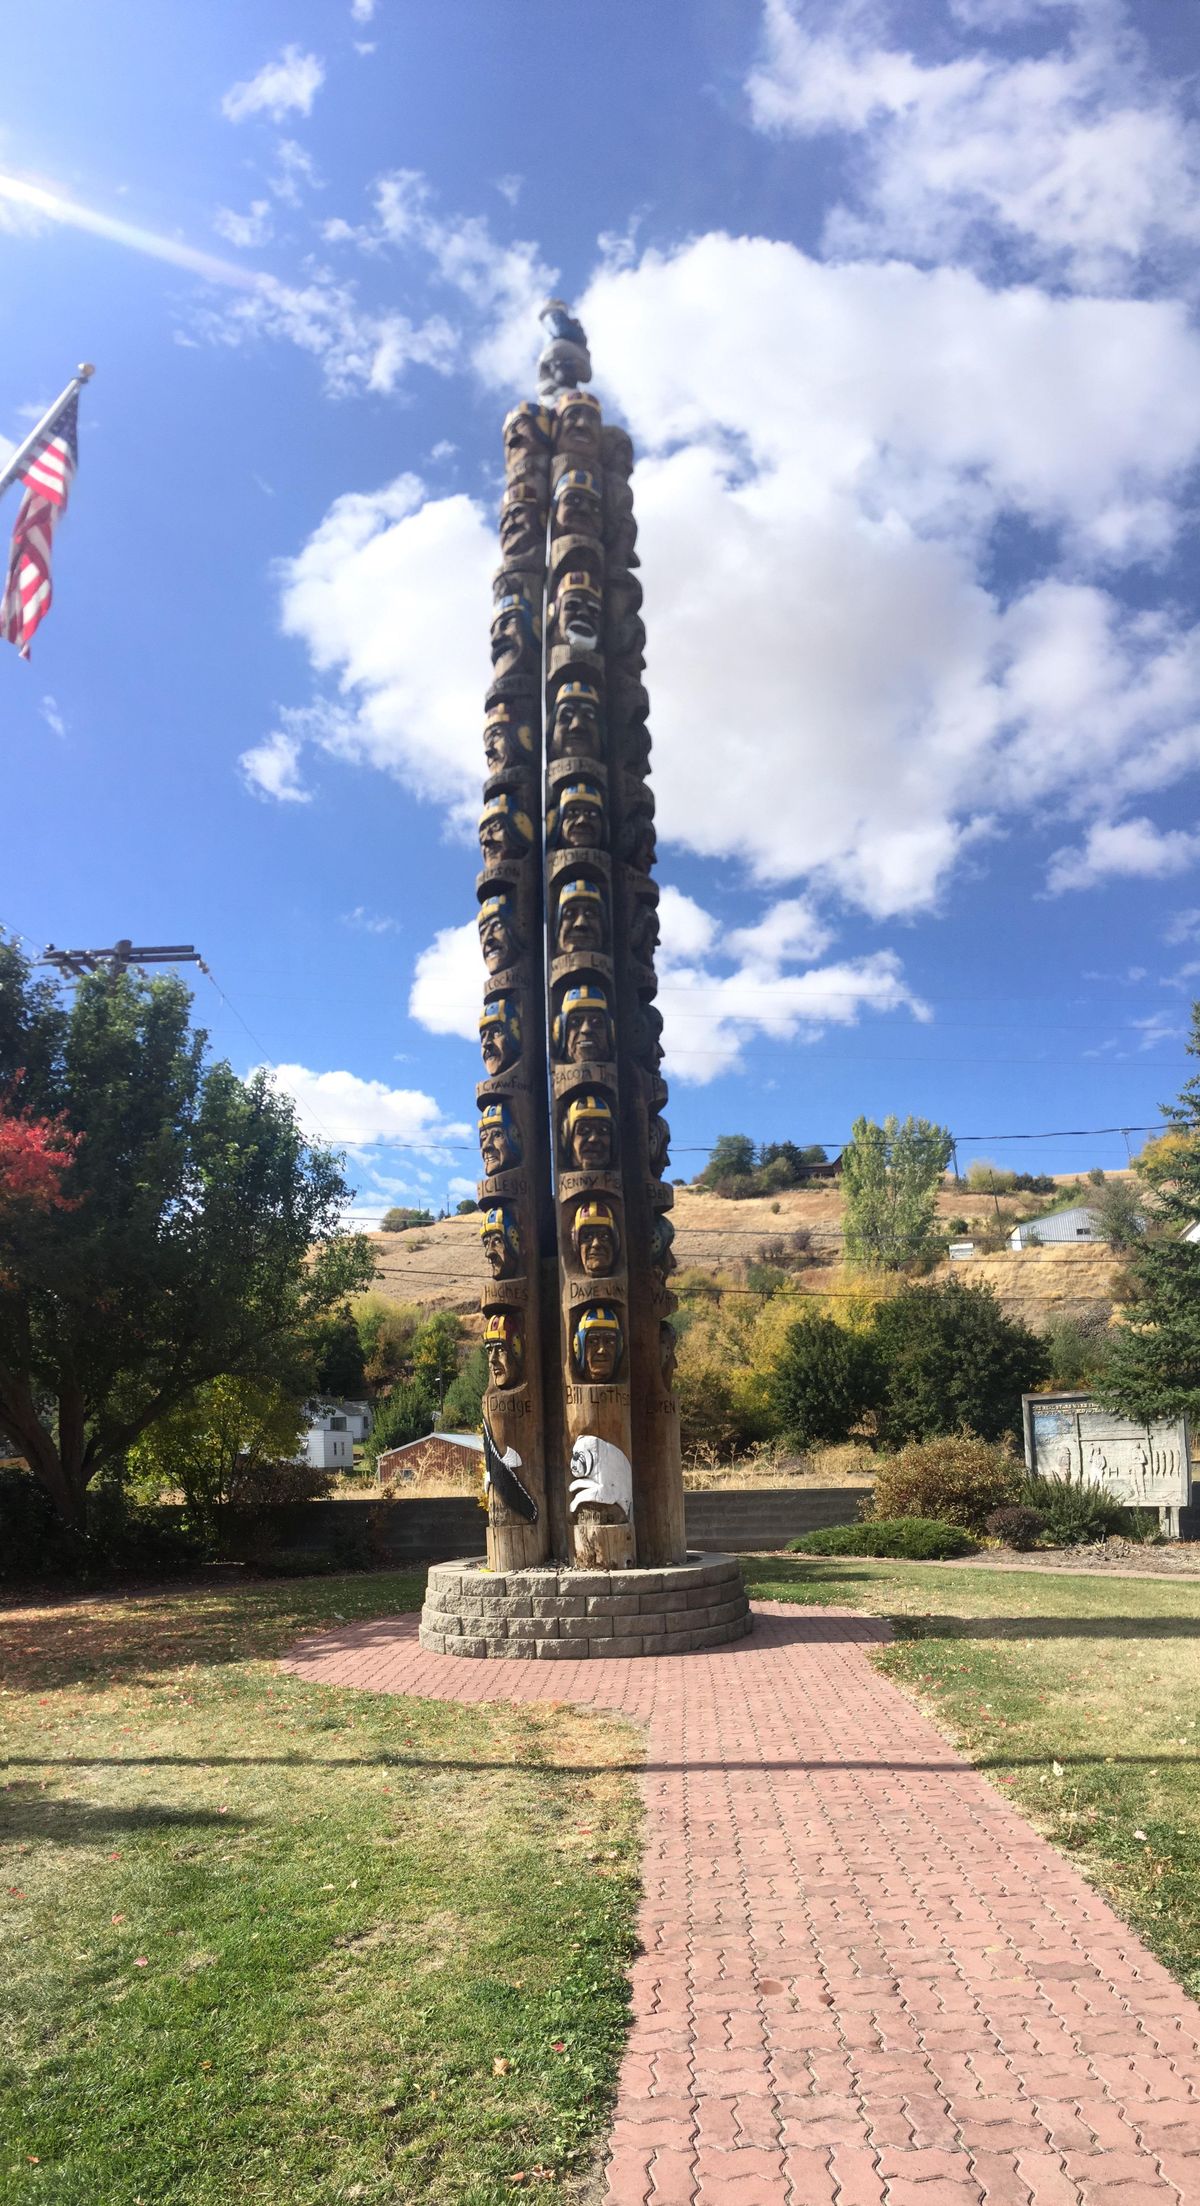 The “Codger Pole” is a piece of chainsaw art in Colfax, dedicated in 1991 to commemorate a 1988 football game. It’s being restored.